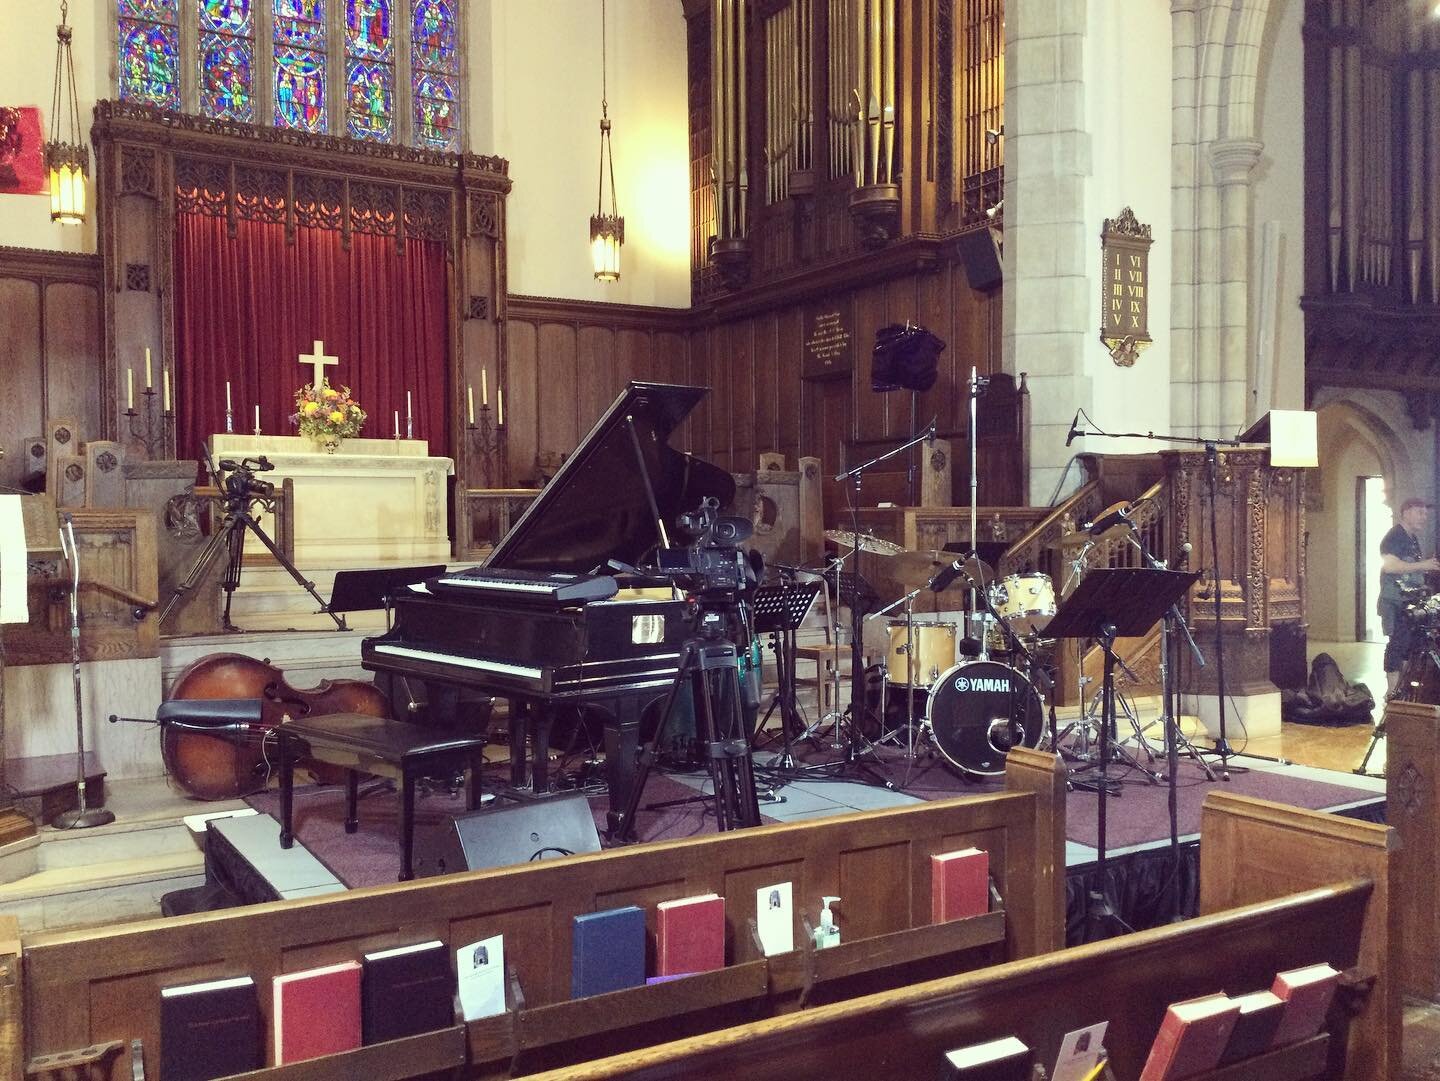 Todays gig: recording and reinforcement for the Newton Piano Summit. #latinjazz with @haroldcharonmusic